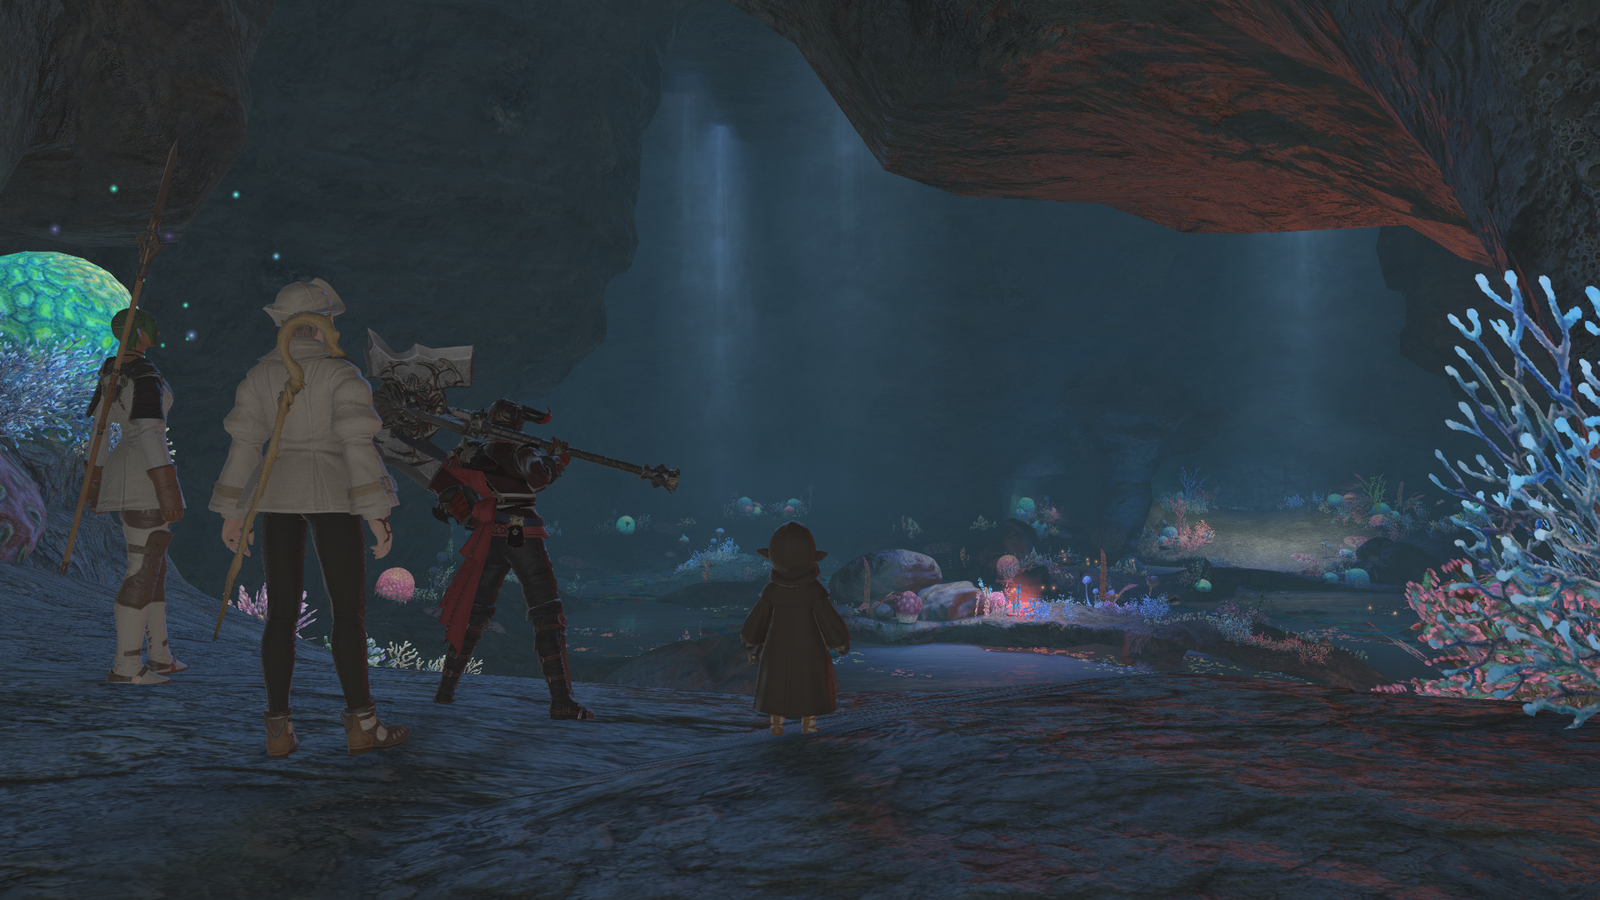 An image of four adventurers ready to take on an aquatic, underground cavern from the FFXIV Dungeon Sastasha.